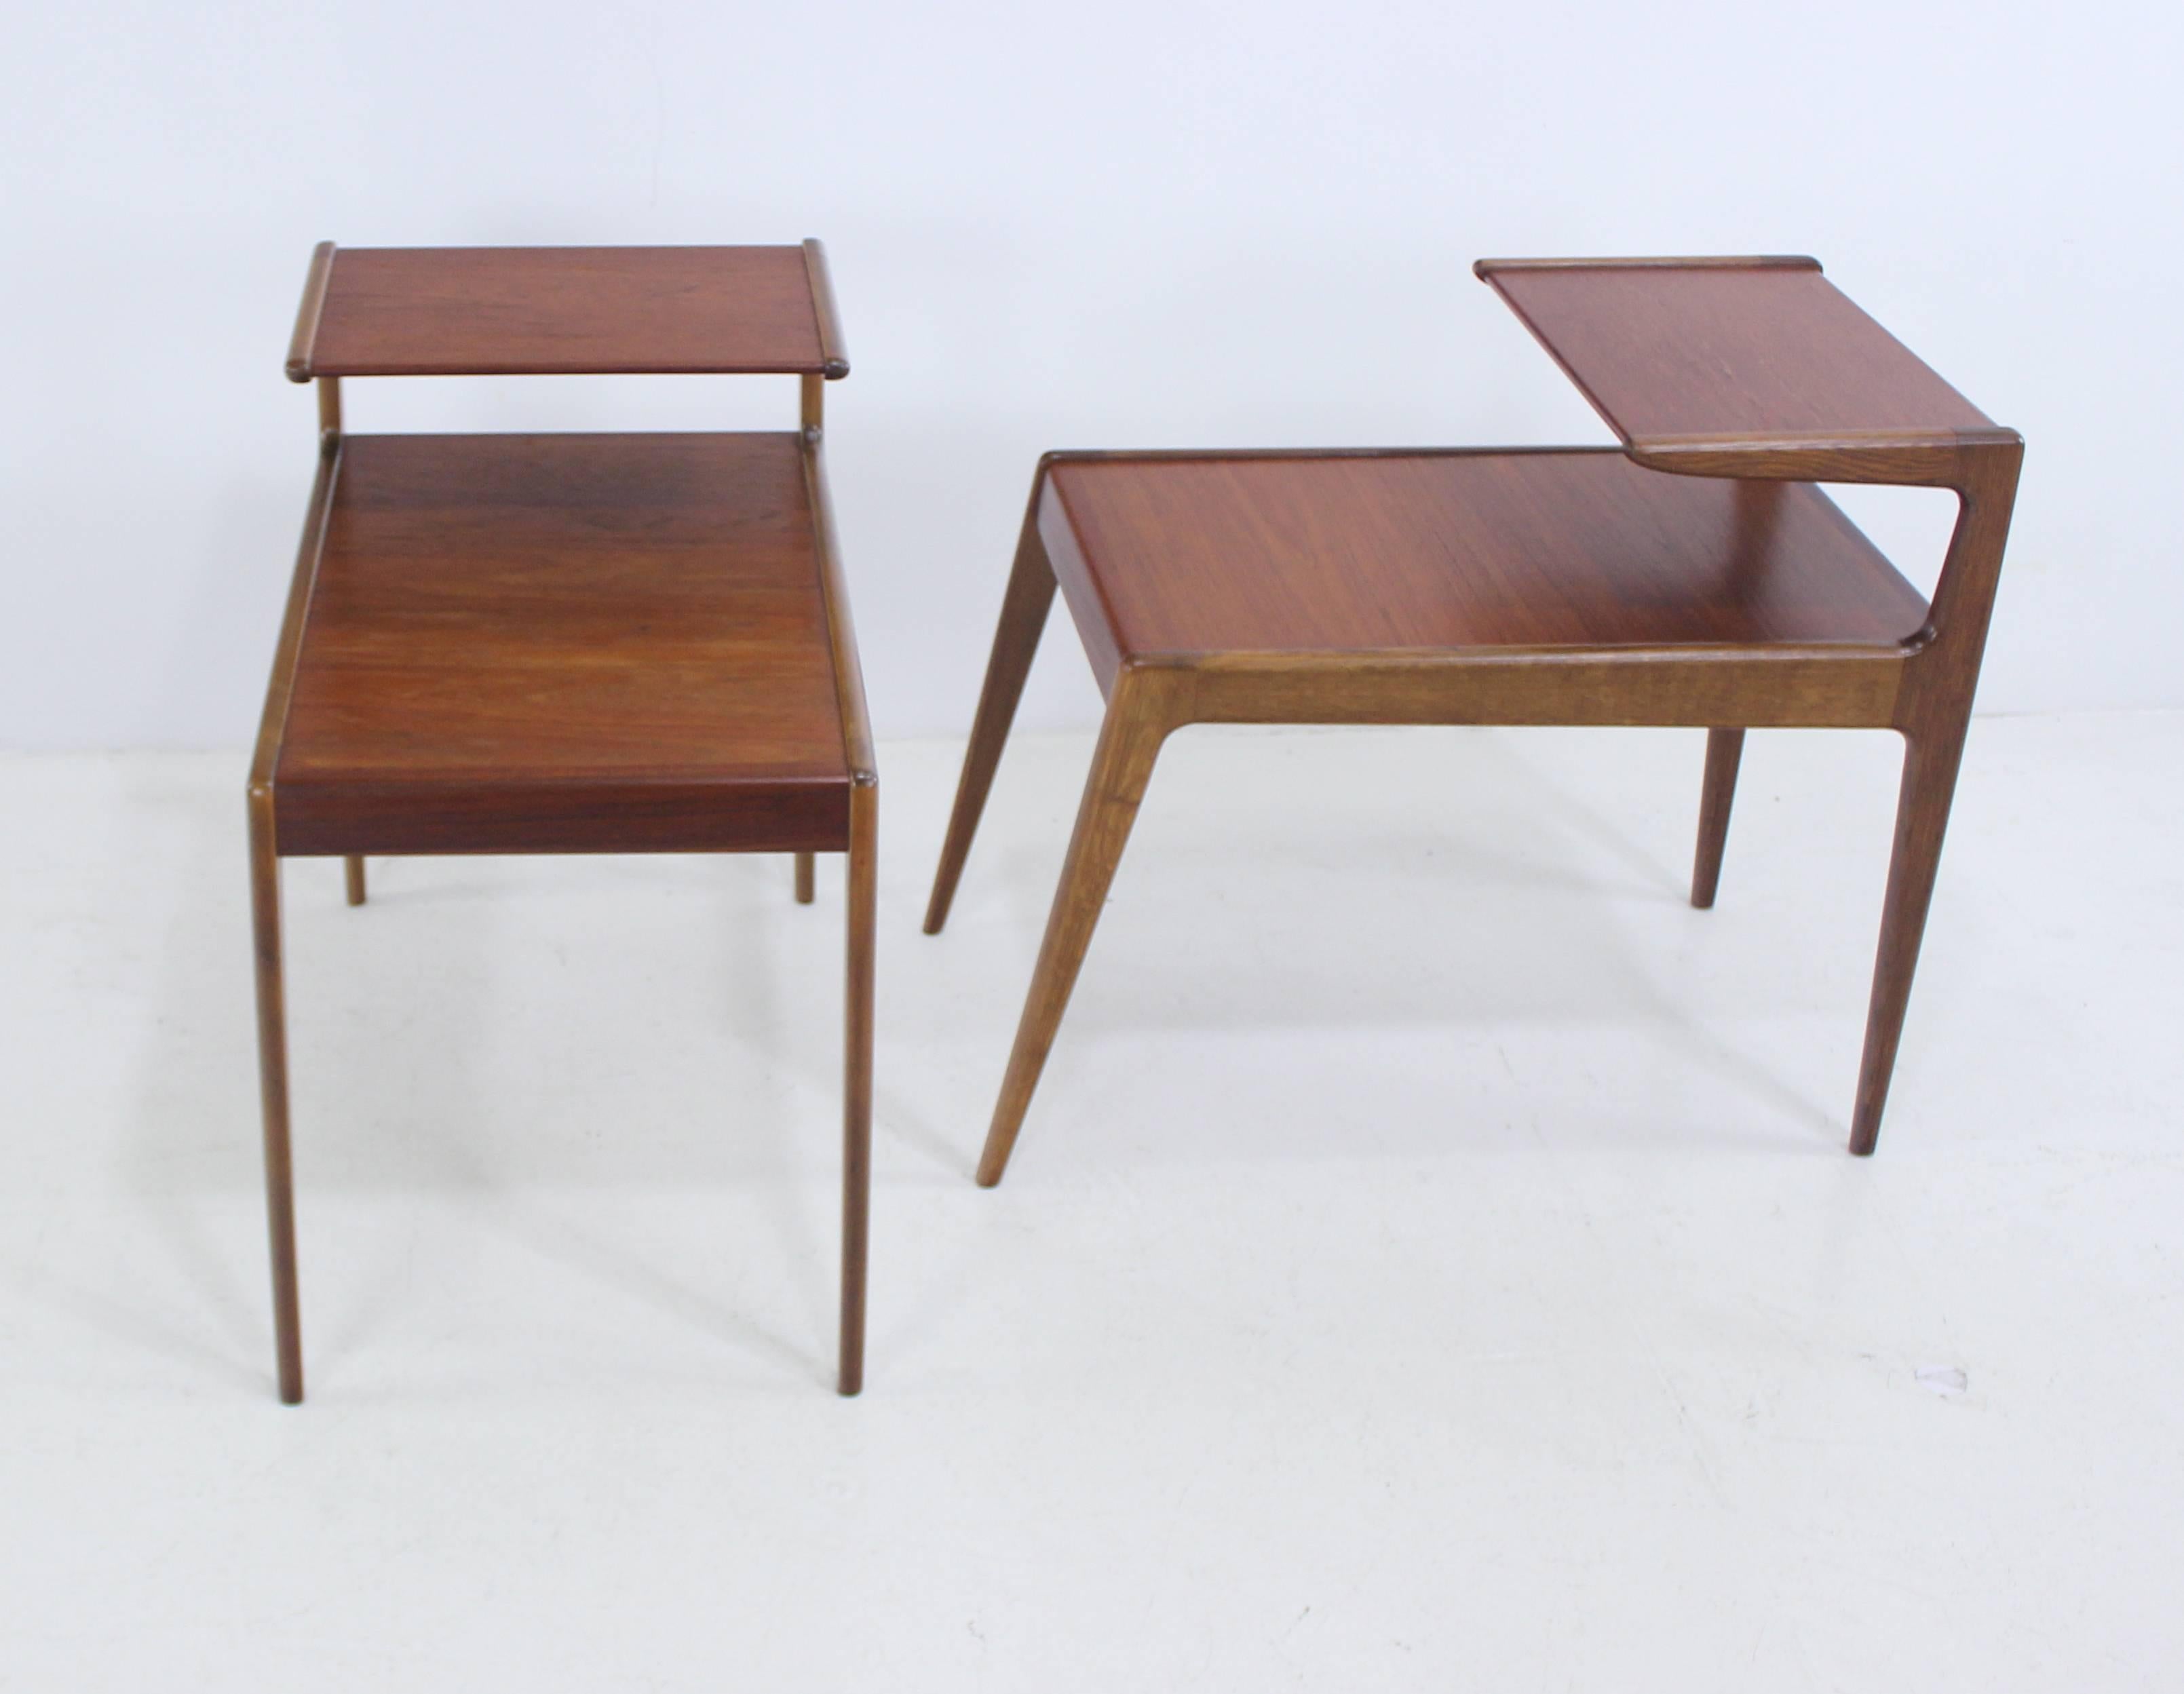 Two Danish modern end tables.
Designed with distinctive flair by Kurt Ostervig. Jason, maker.
A beautiful combination of beech frames and teak tops.
Lower surface height 18".
Professionally restored and refinished by LookModern.
Matchless